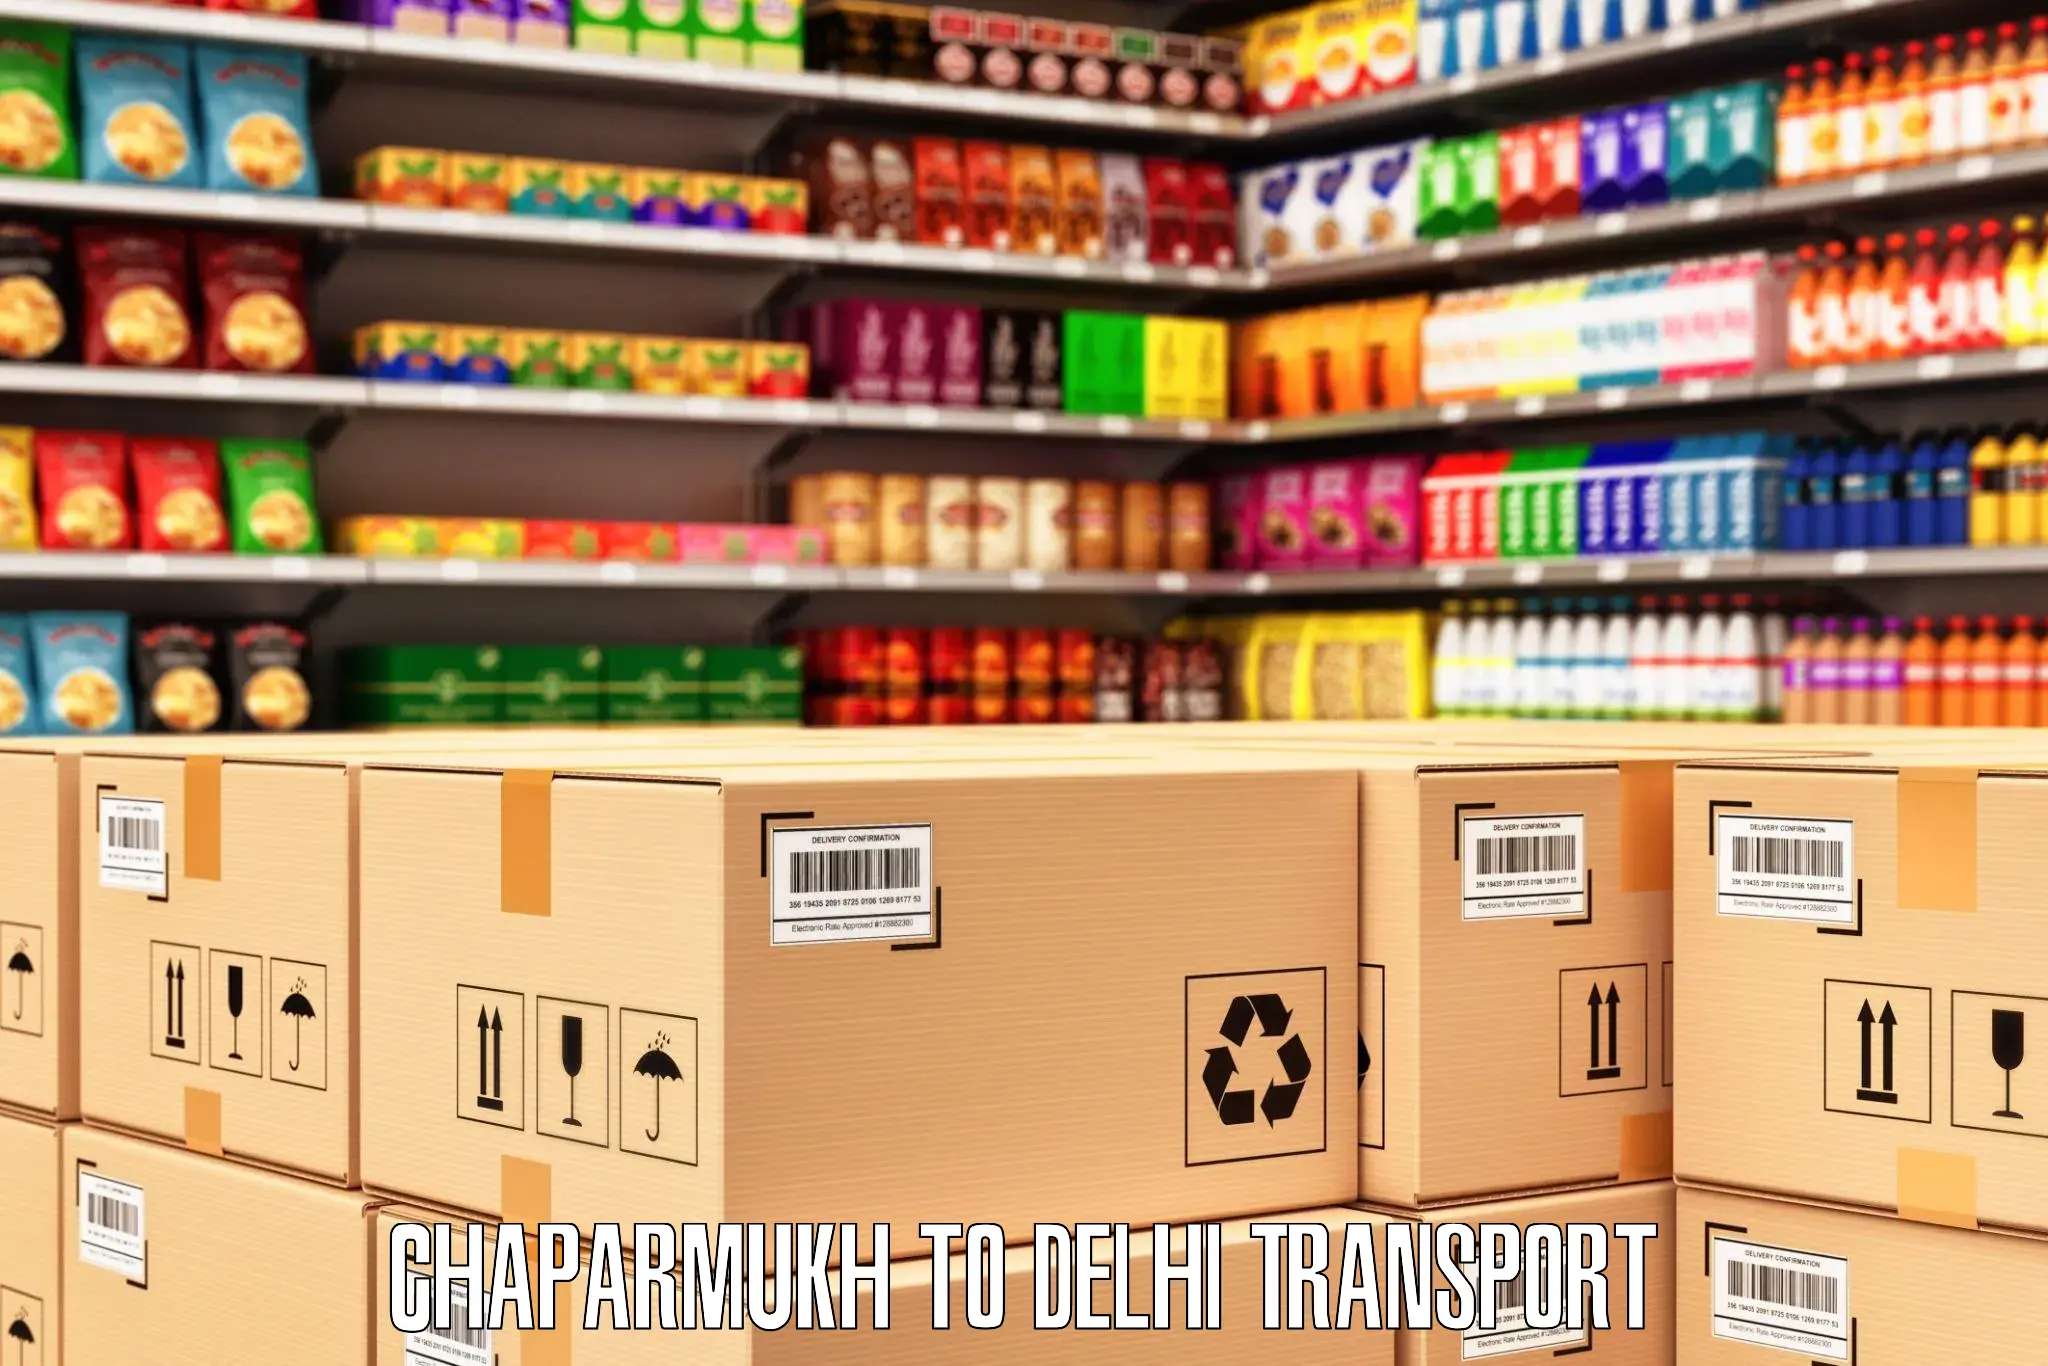 Transport shared services Chaparmukh to Delhi